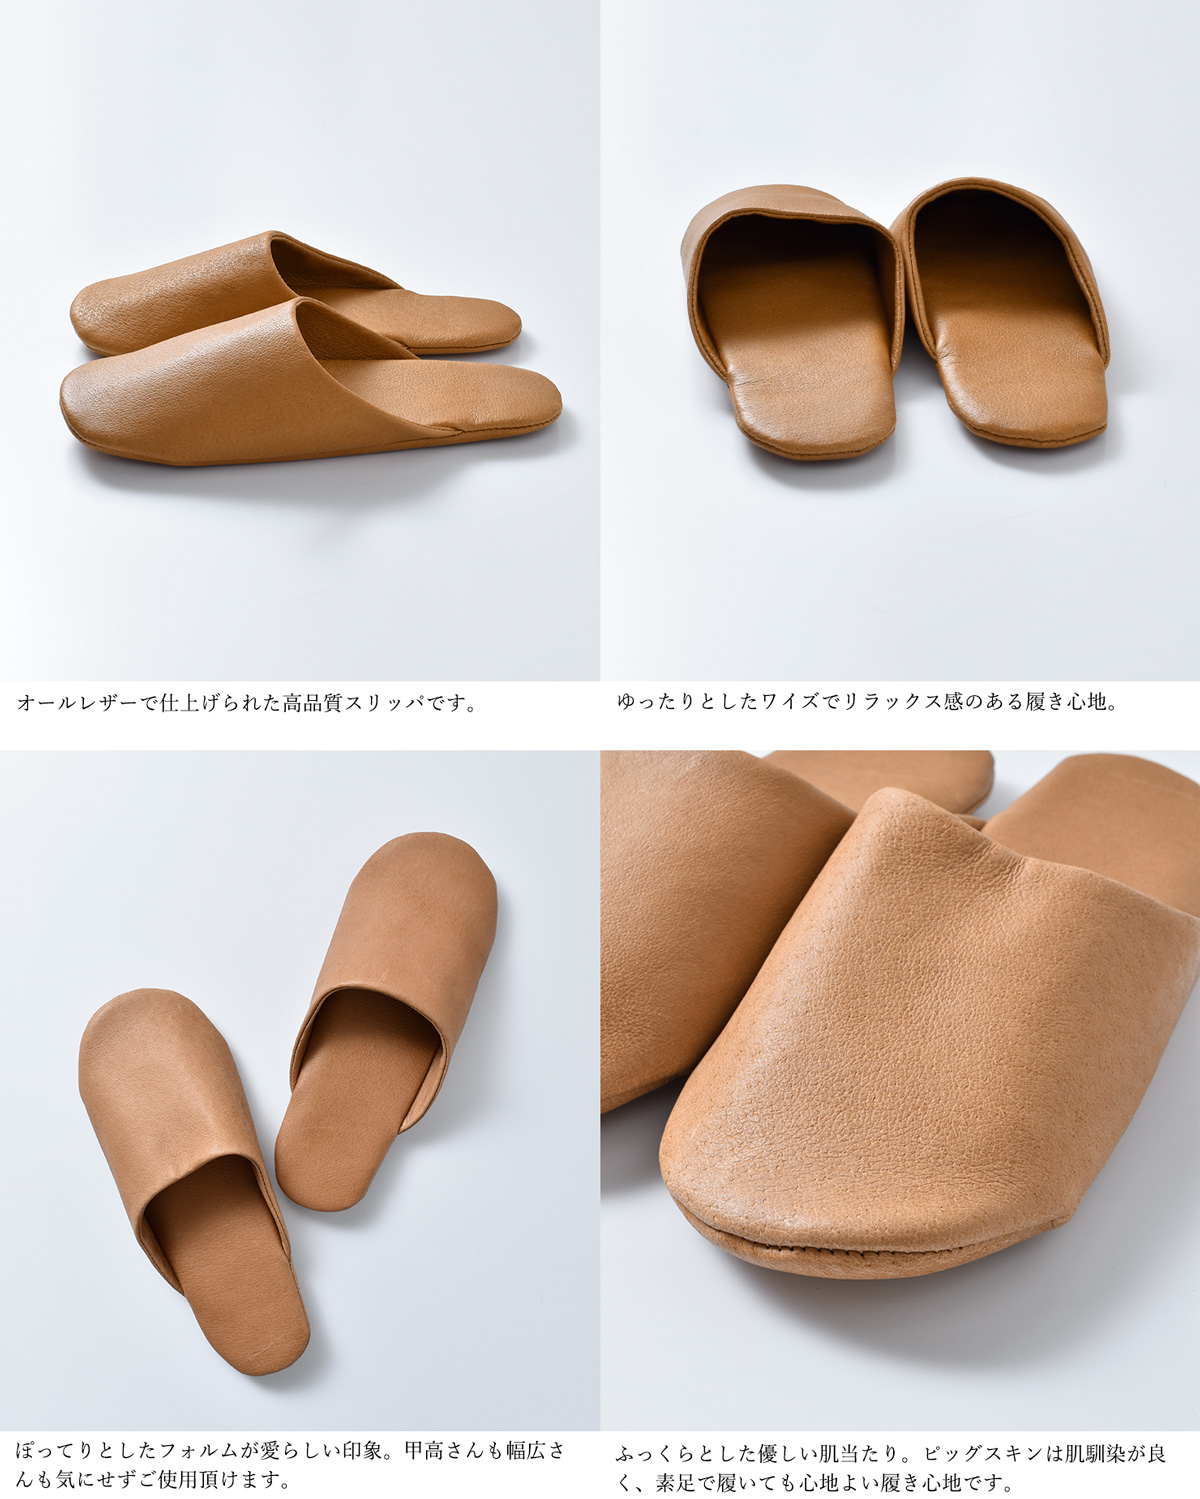 roomshoes-ladysonor(\i[)sbOXLXbpgSLIPPERS LADYh slippers-lady